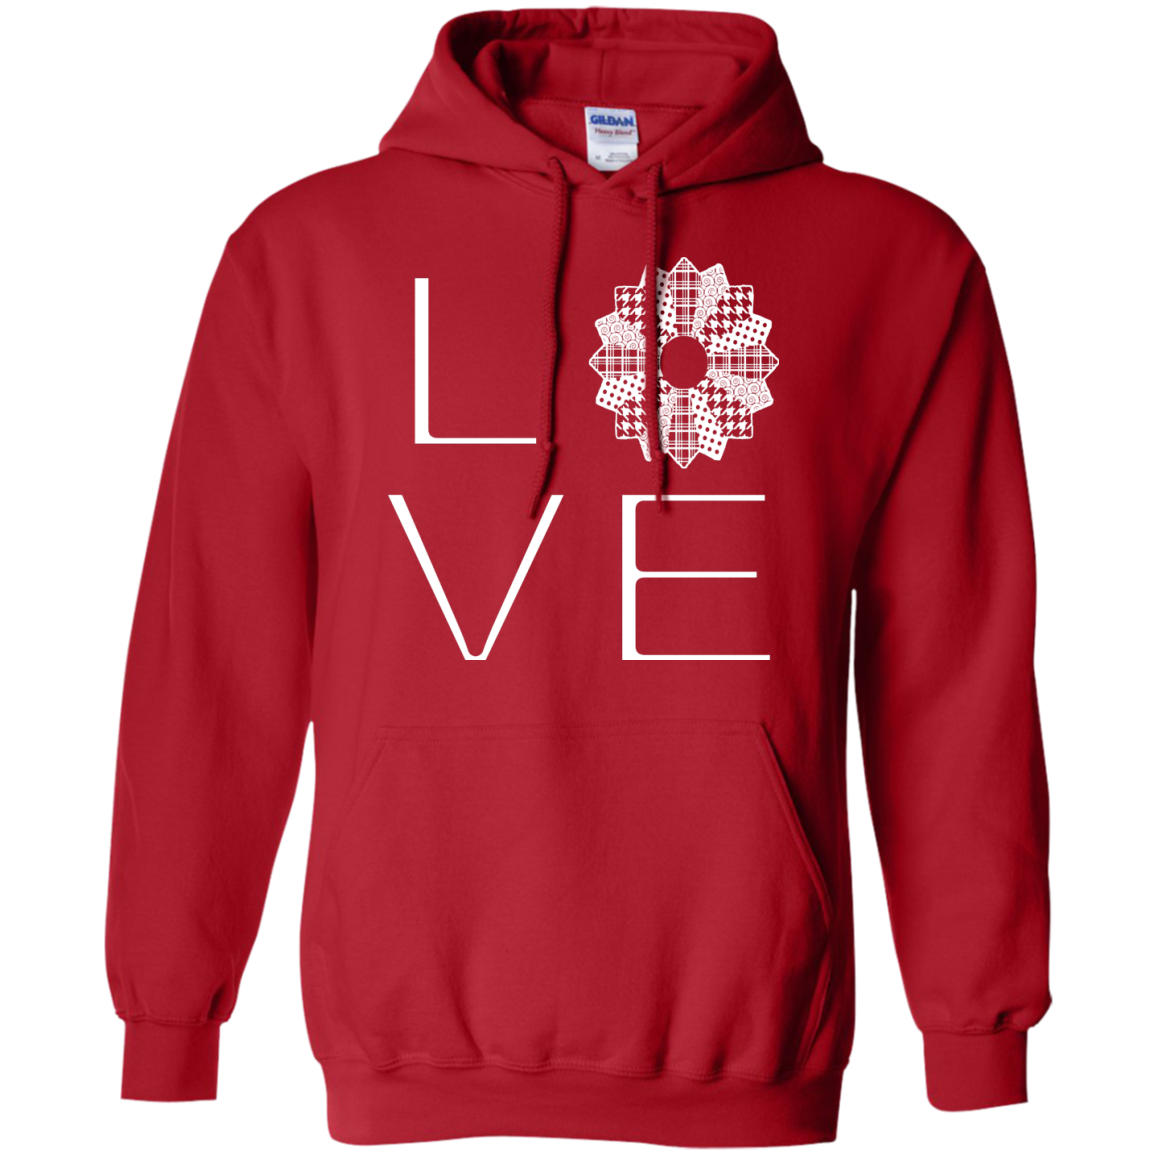 LOVE Quilting Pullover Hoodies - Crafter4Life - 5